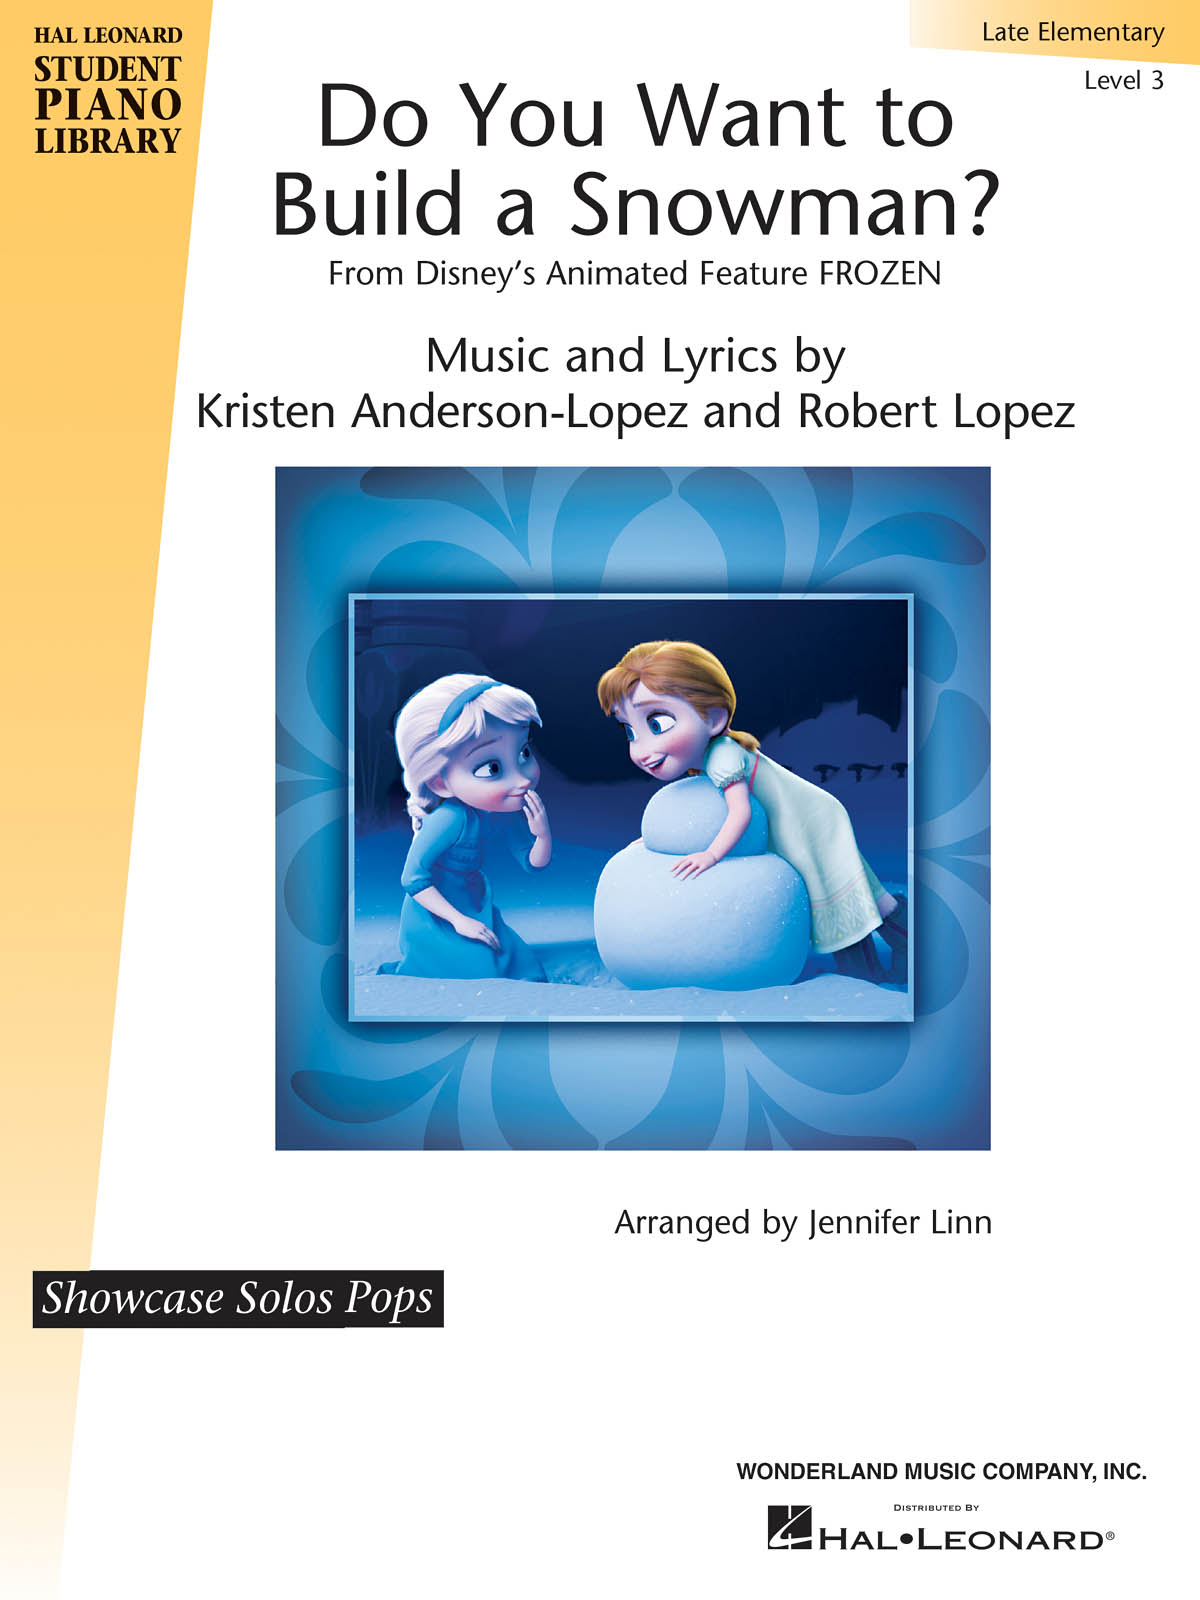 Do You Want to Build a Snowman (from Frozen) - Hal Leonard Student Piano Libary Showcase Solos Pops - Late Elementary